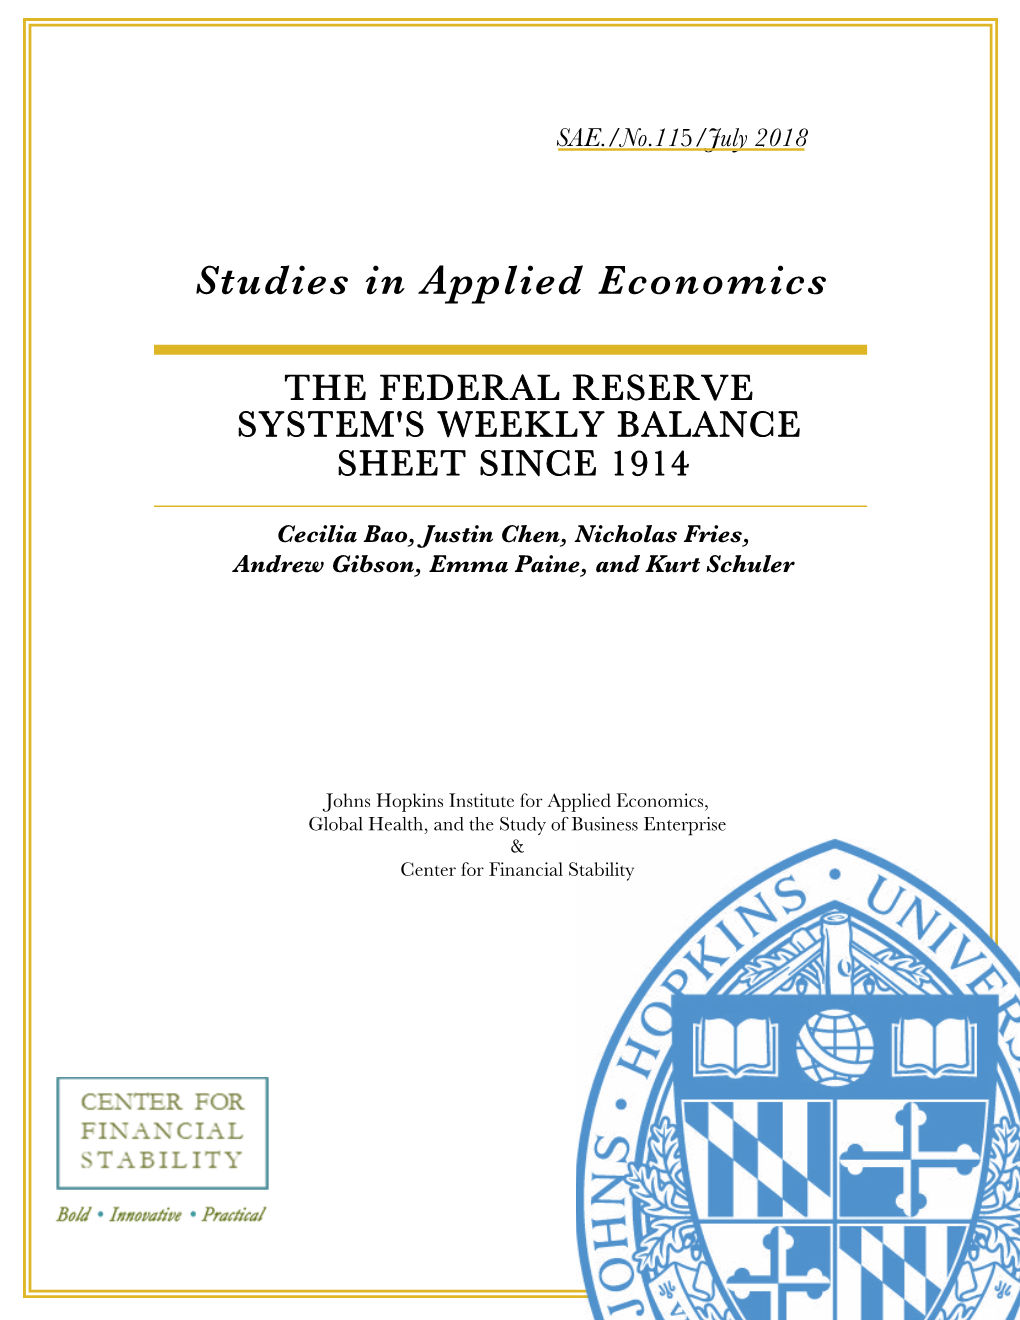 The Federal Reserve System's Weekly